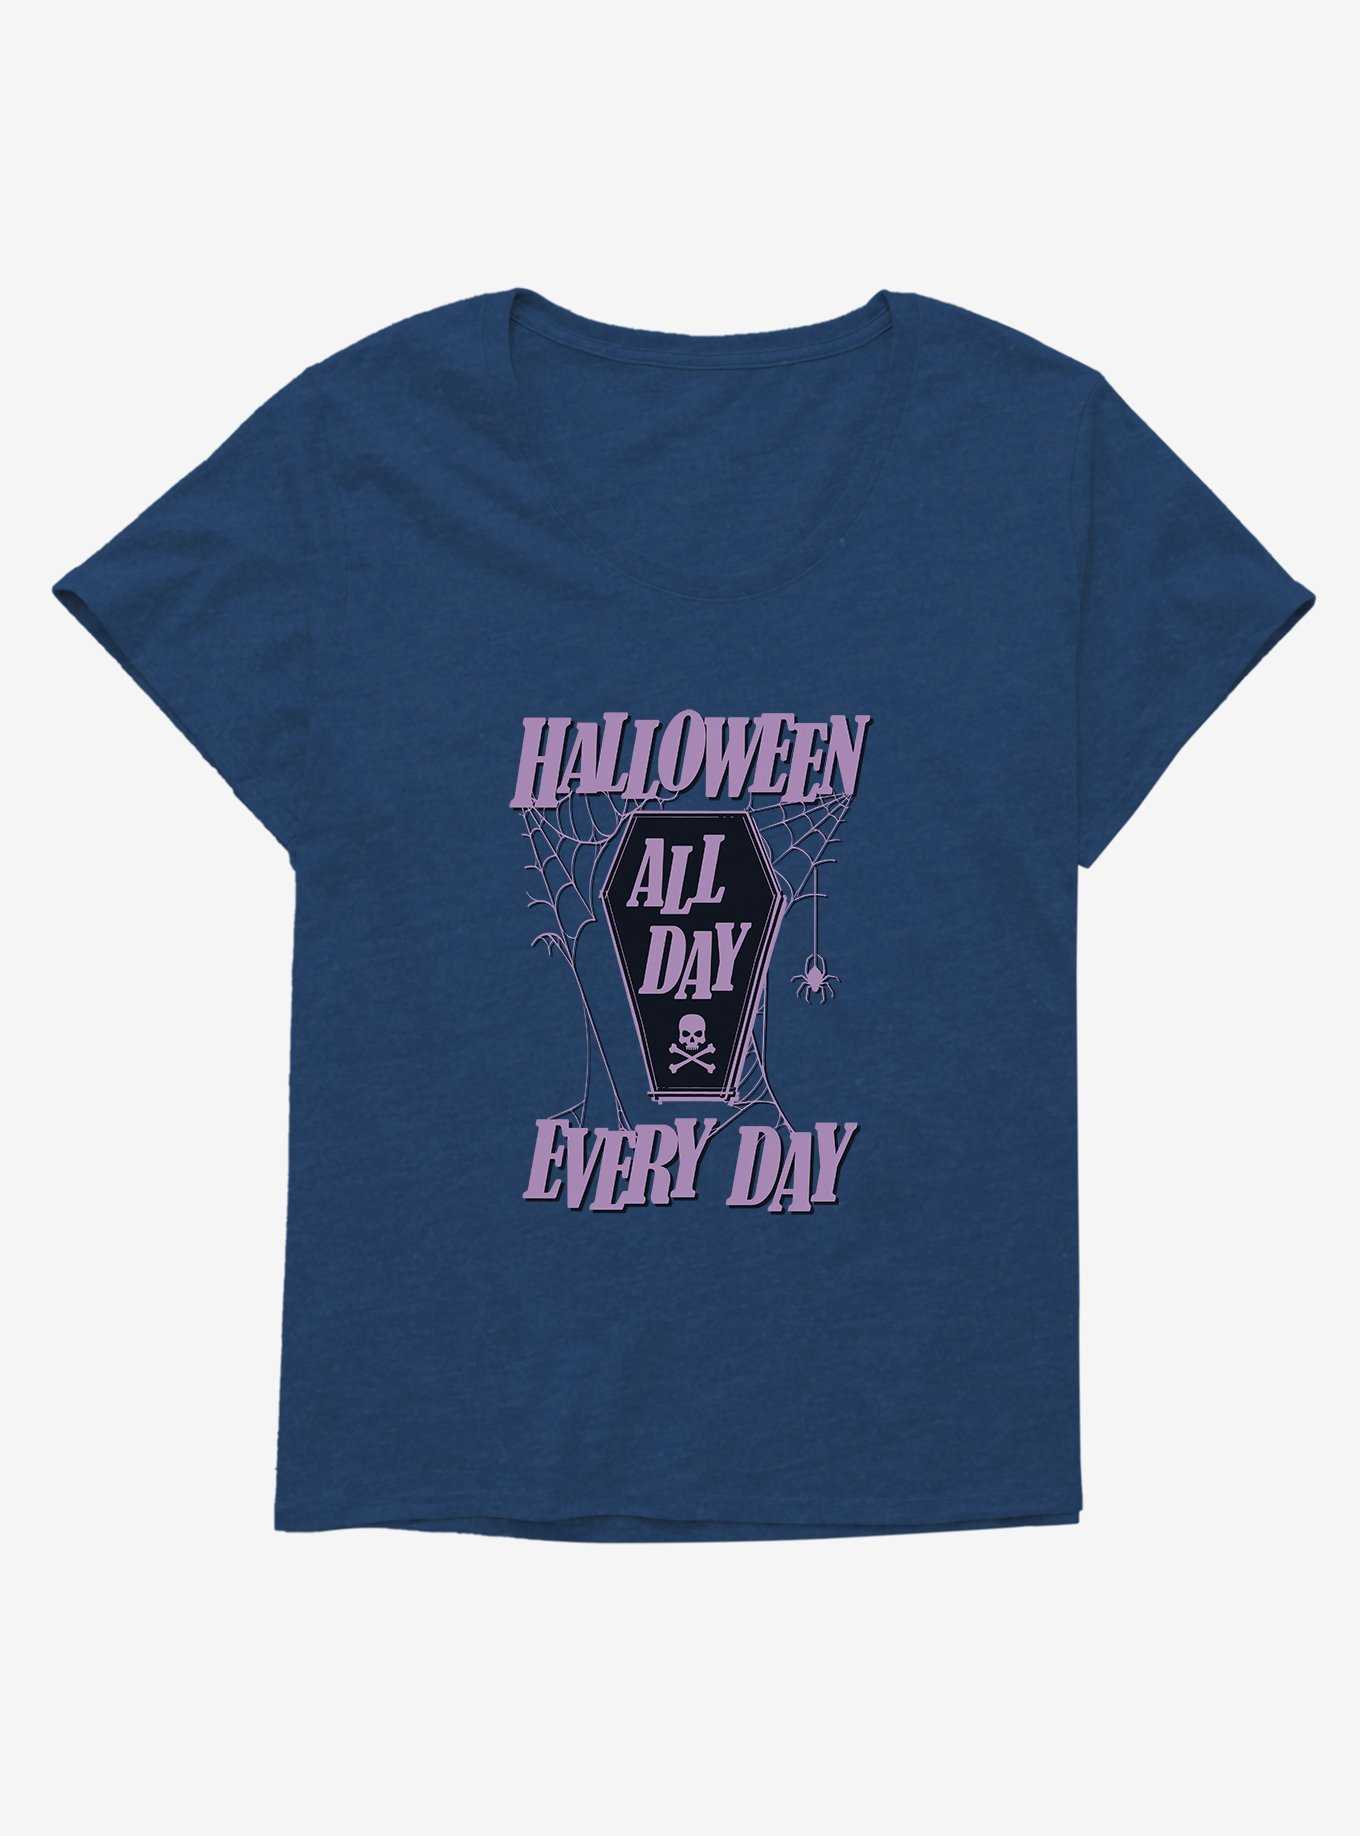 All Day Every Day Girls T-Shirt Plus Size, , hi-res